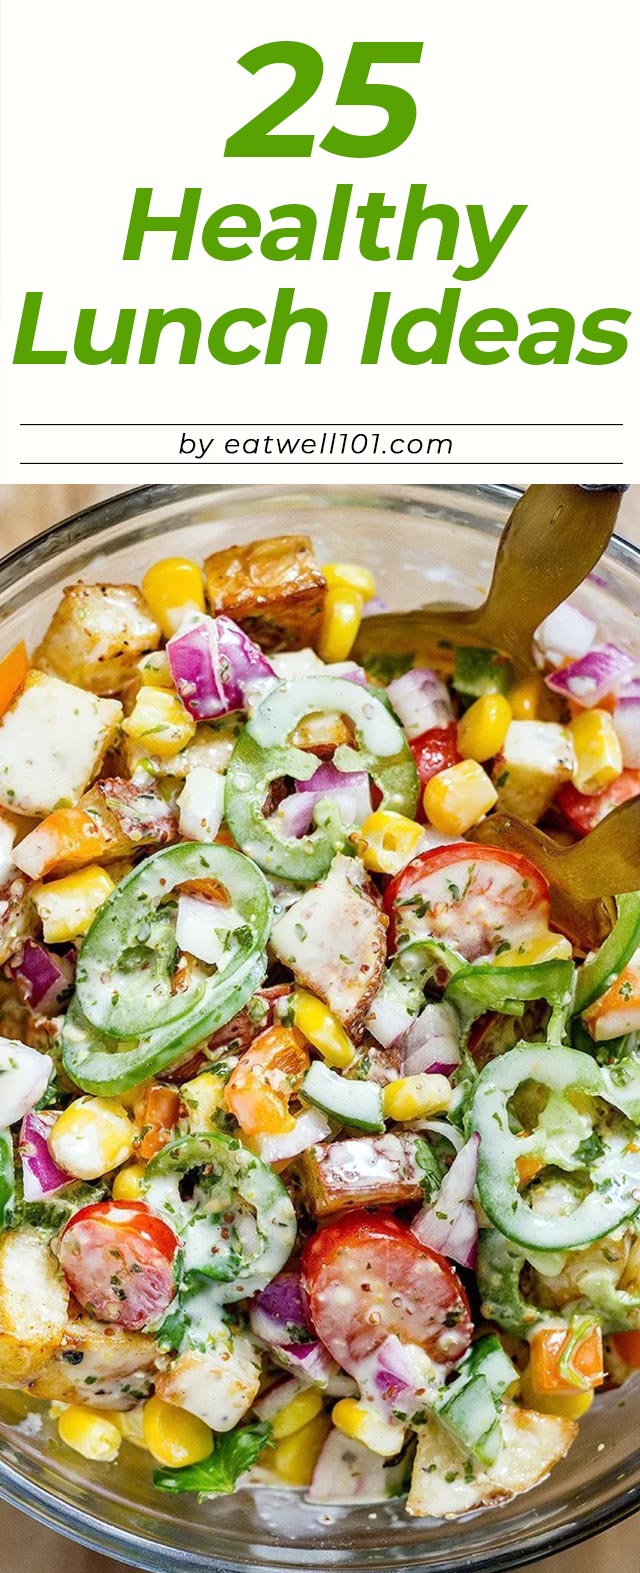 Healthy Lunch Recipes: 25 Easy Healthier Meal Ideas for Lunch - 
#lunch #recipes #eatwell101 -  These healthy lunch recipes are delicious, satisfying, and portable. Enjoy!